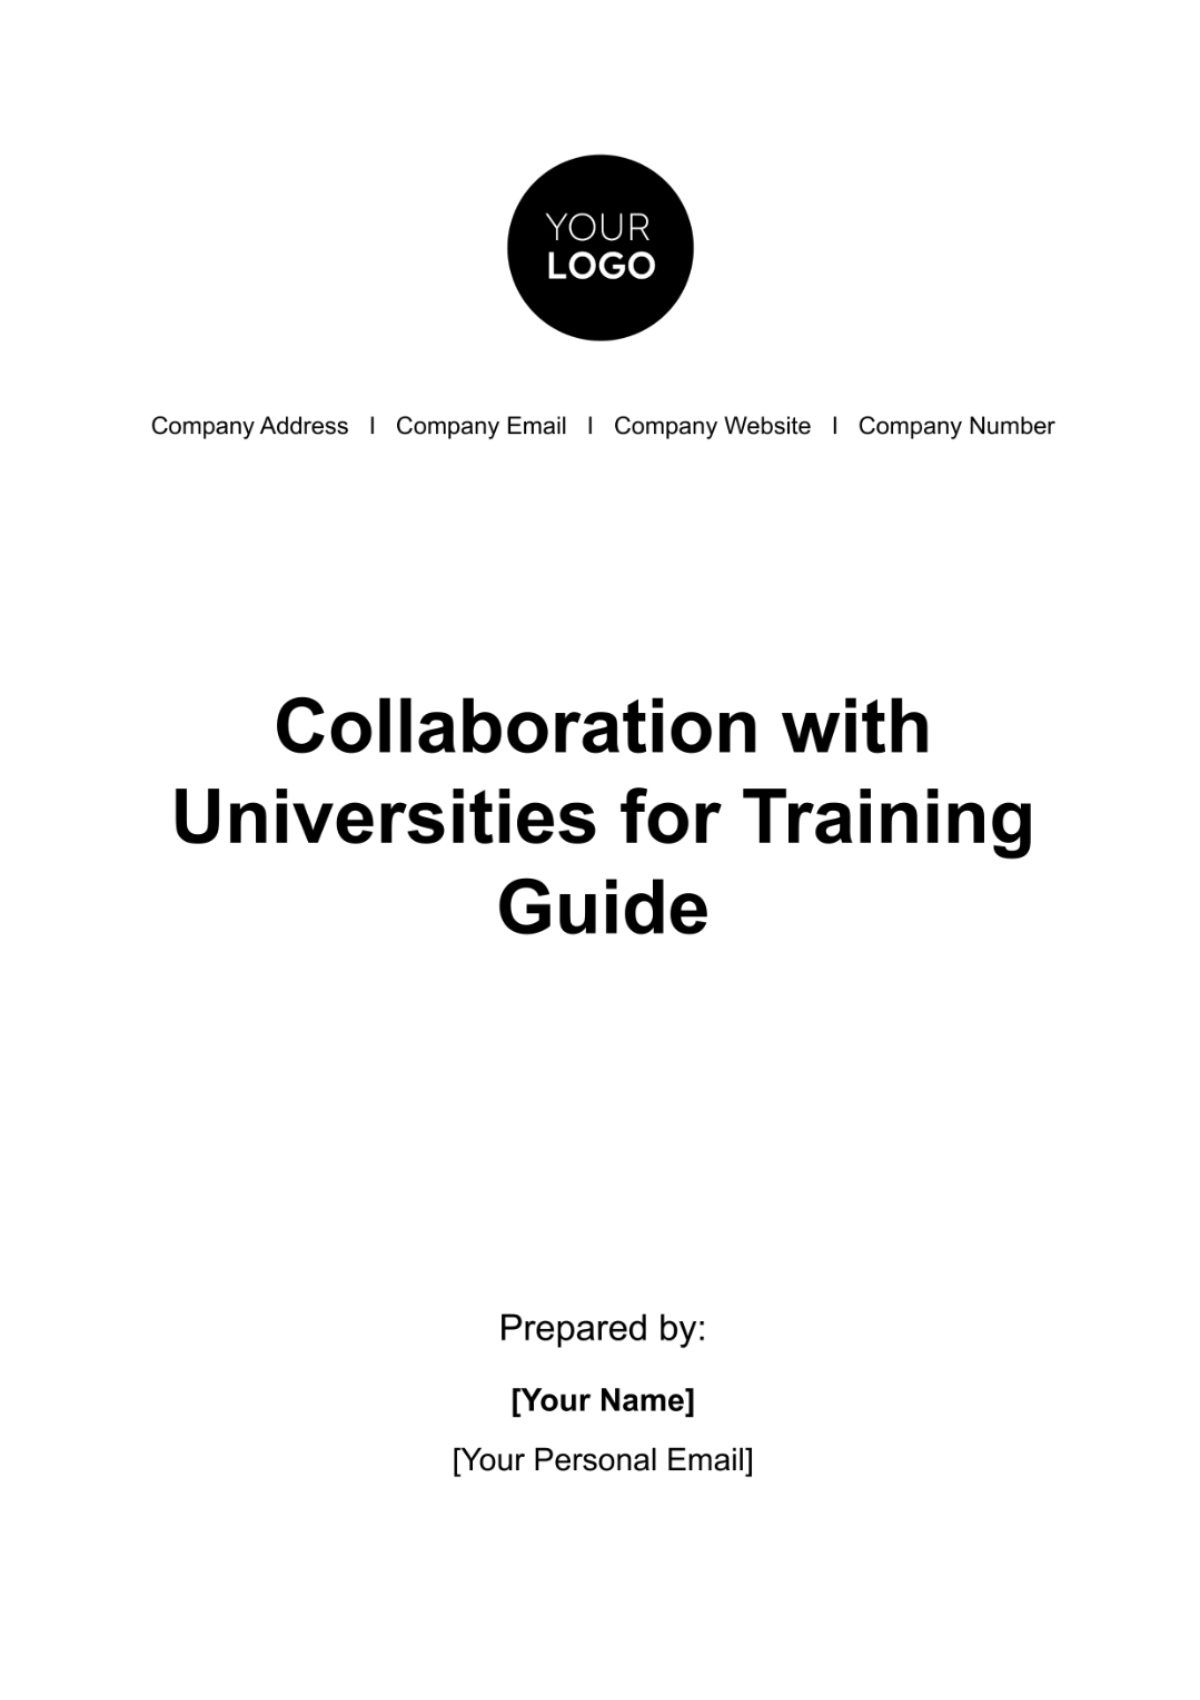 Free Collaboration with Universities for Training Guide HR Template